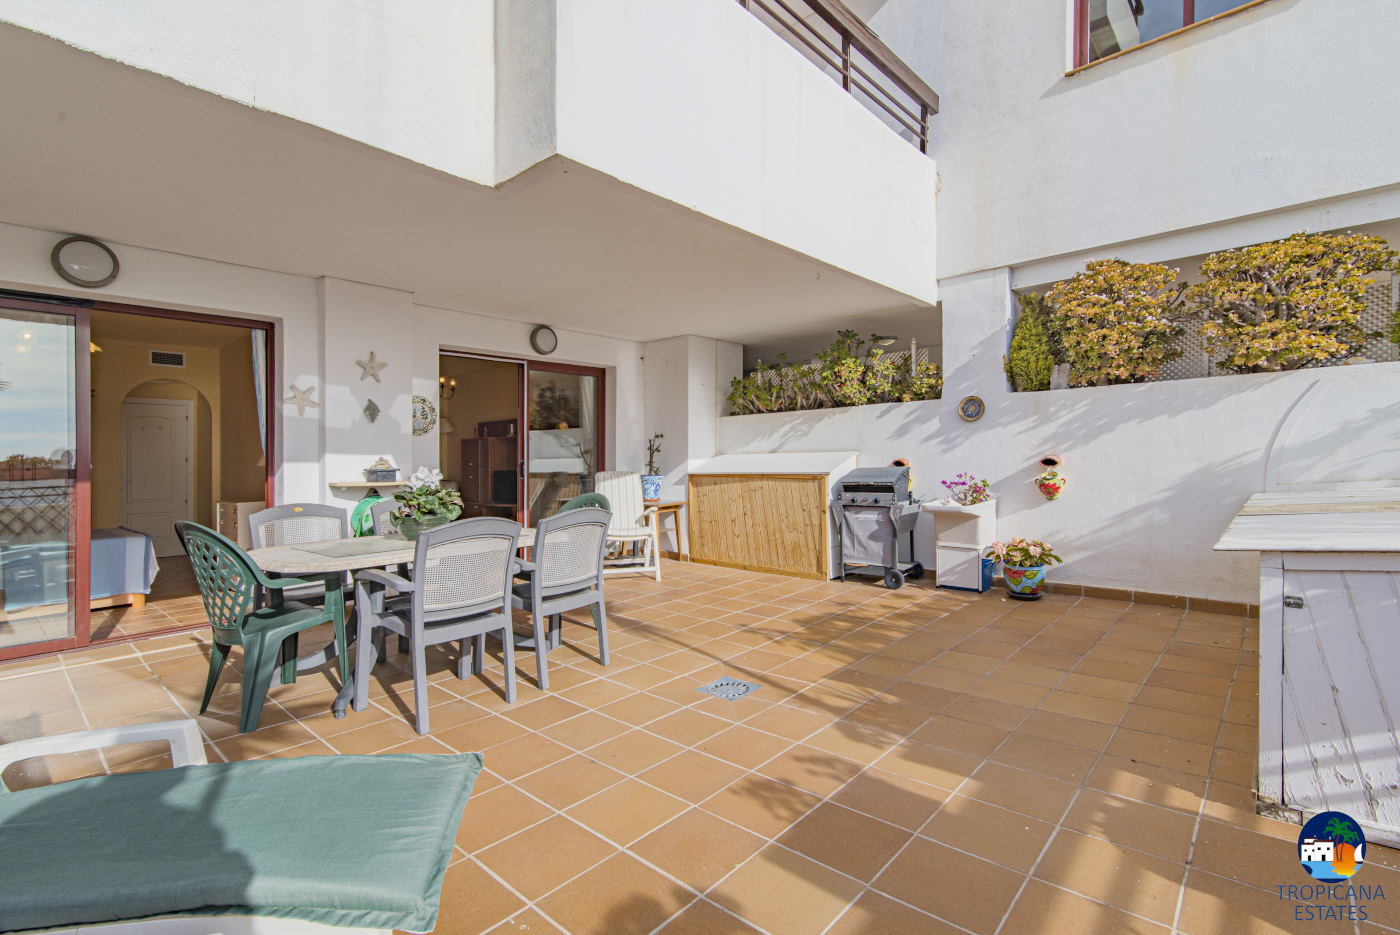 2 BEDROOM APARTMENT WITH HUGE TERRACE